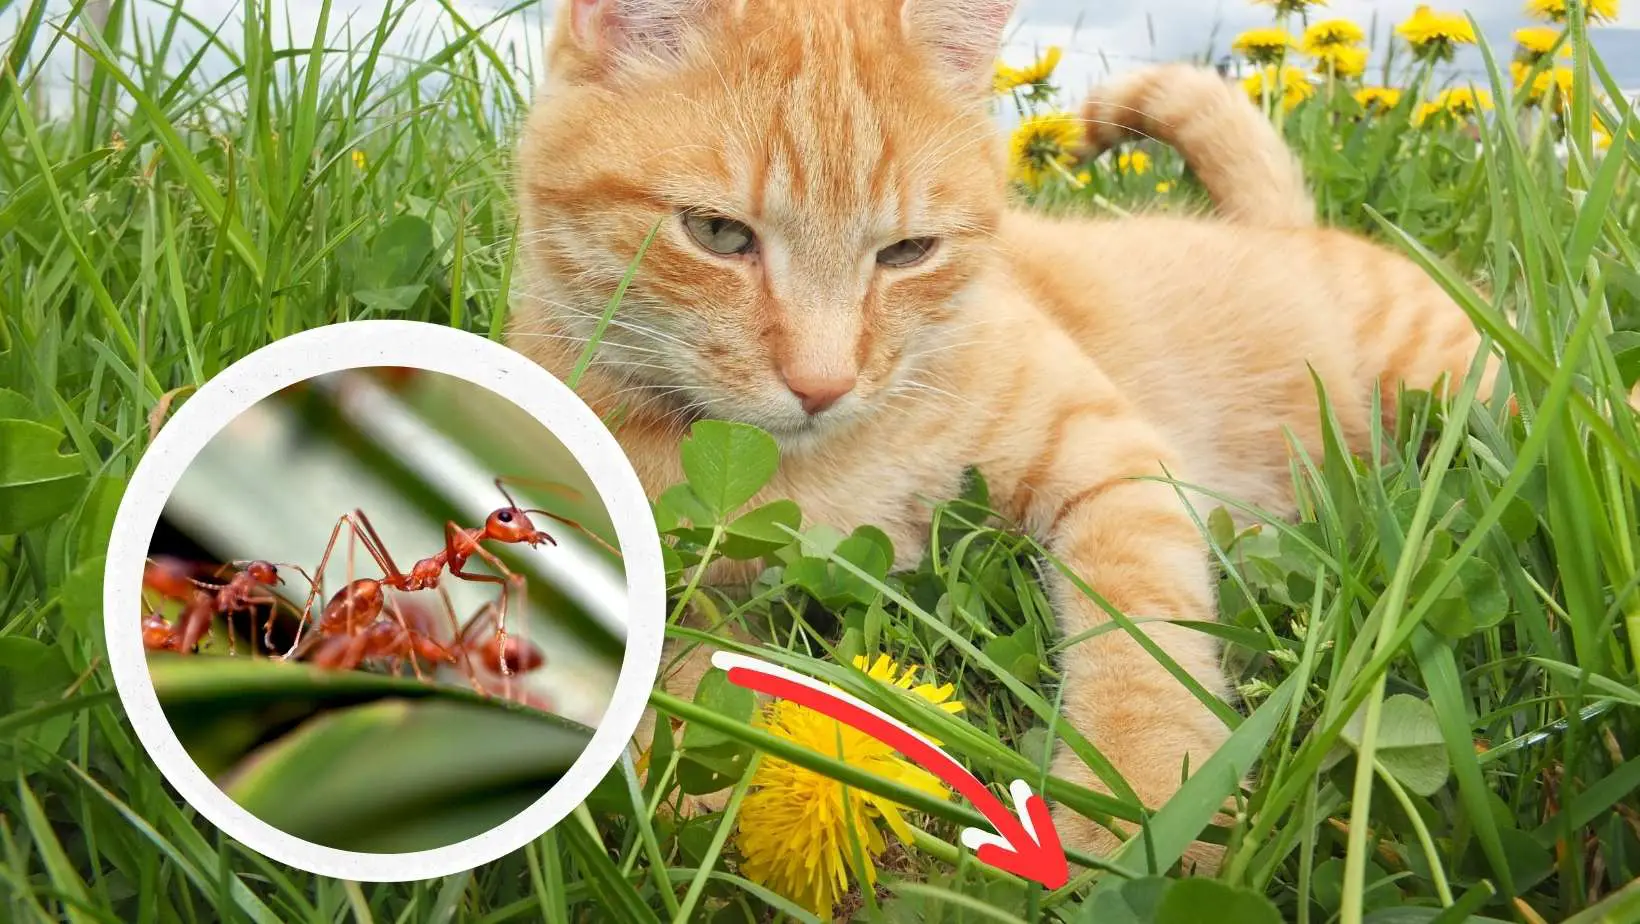 Do Cats Eat Ants?